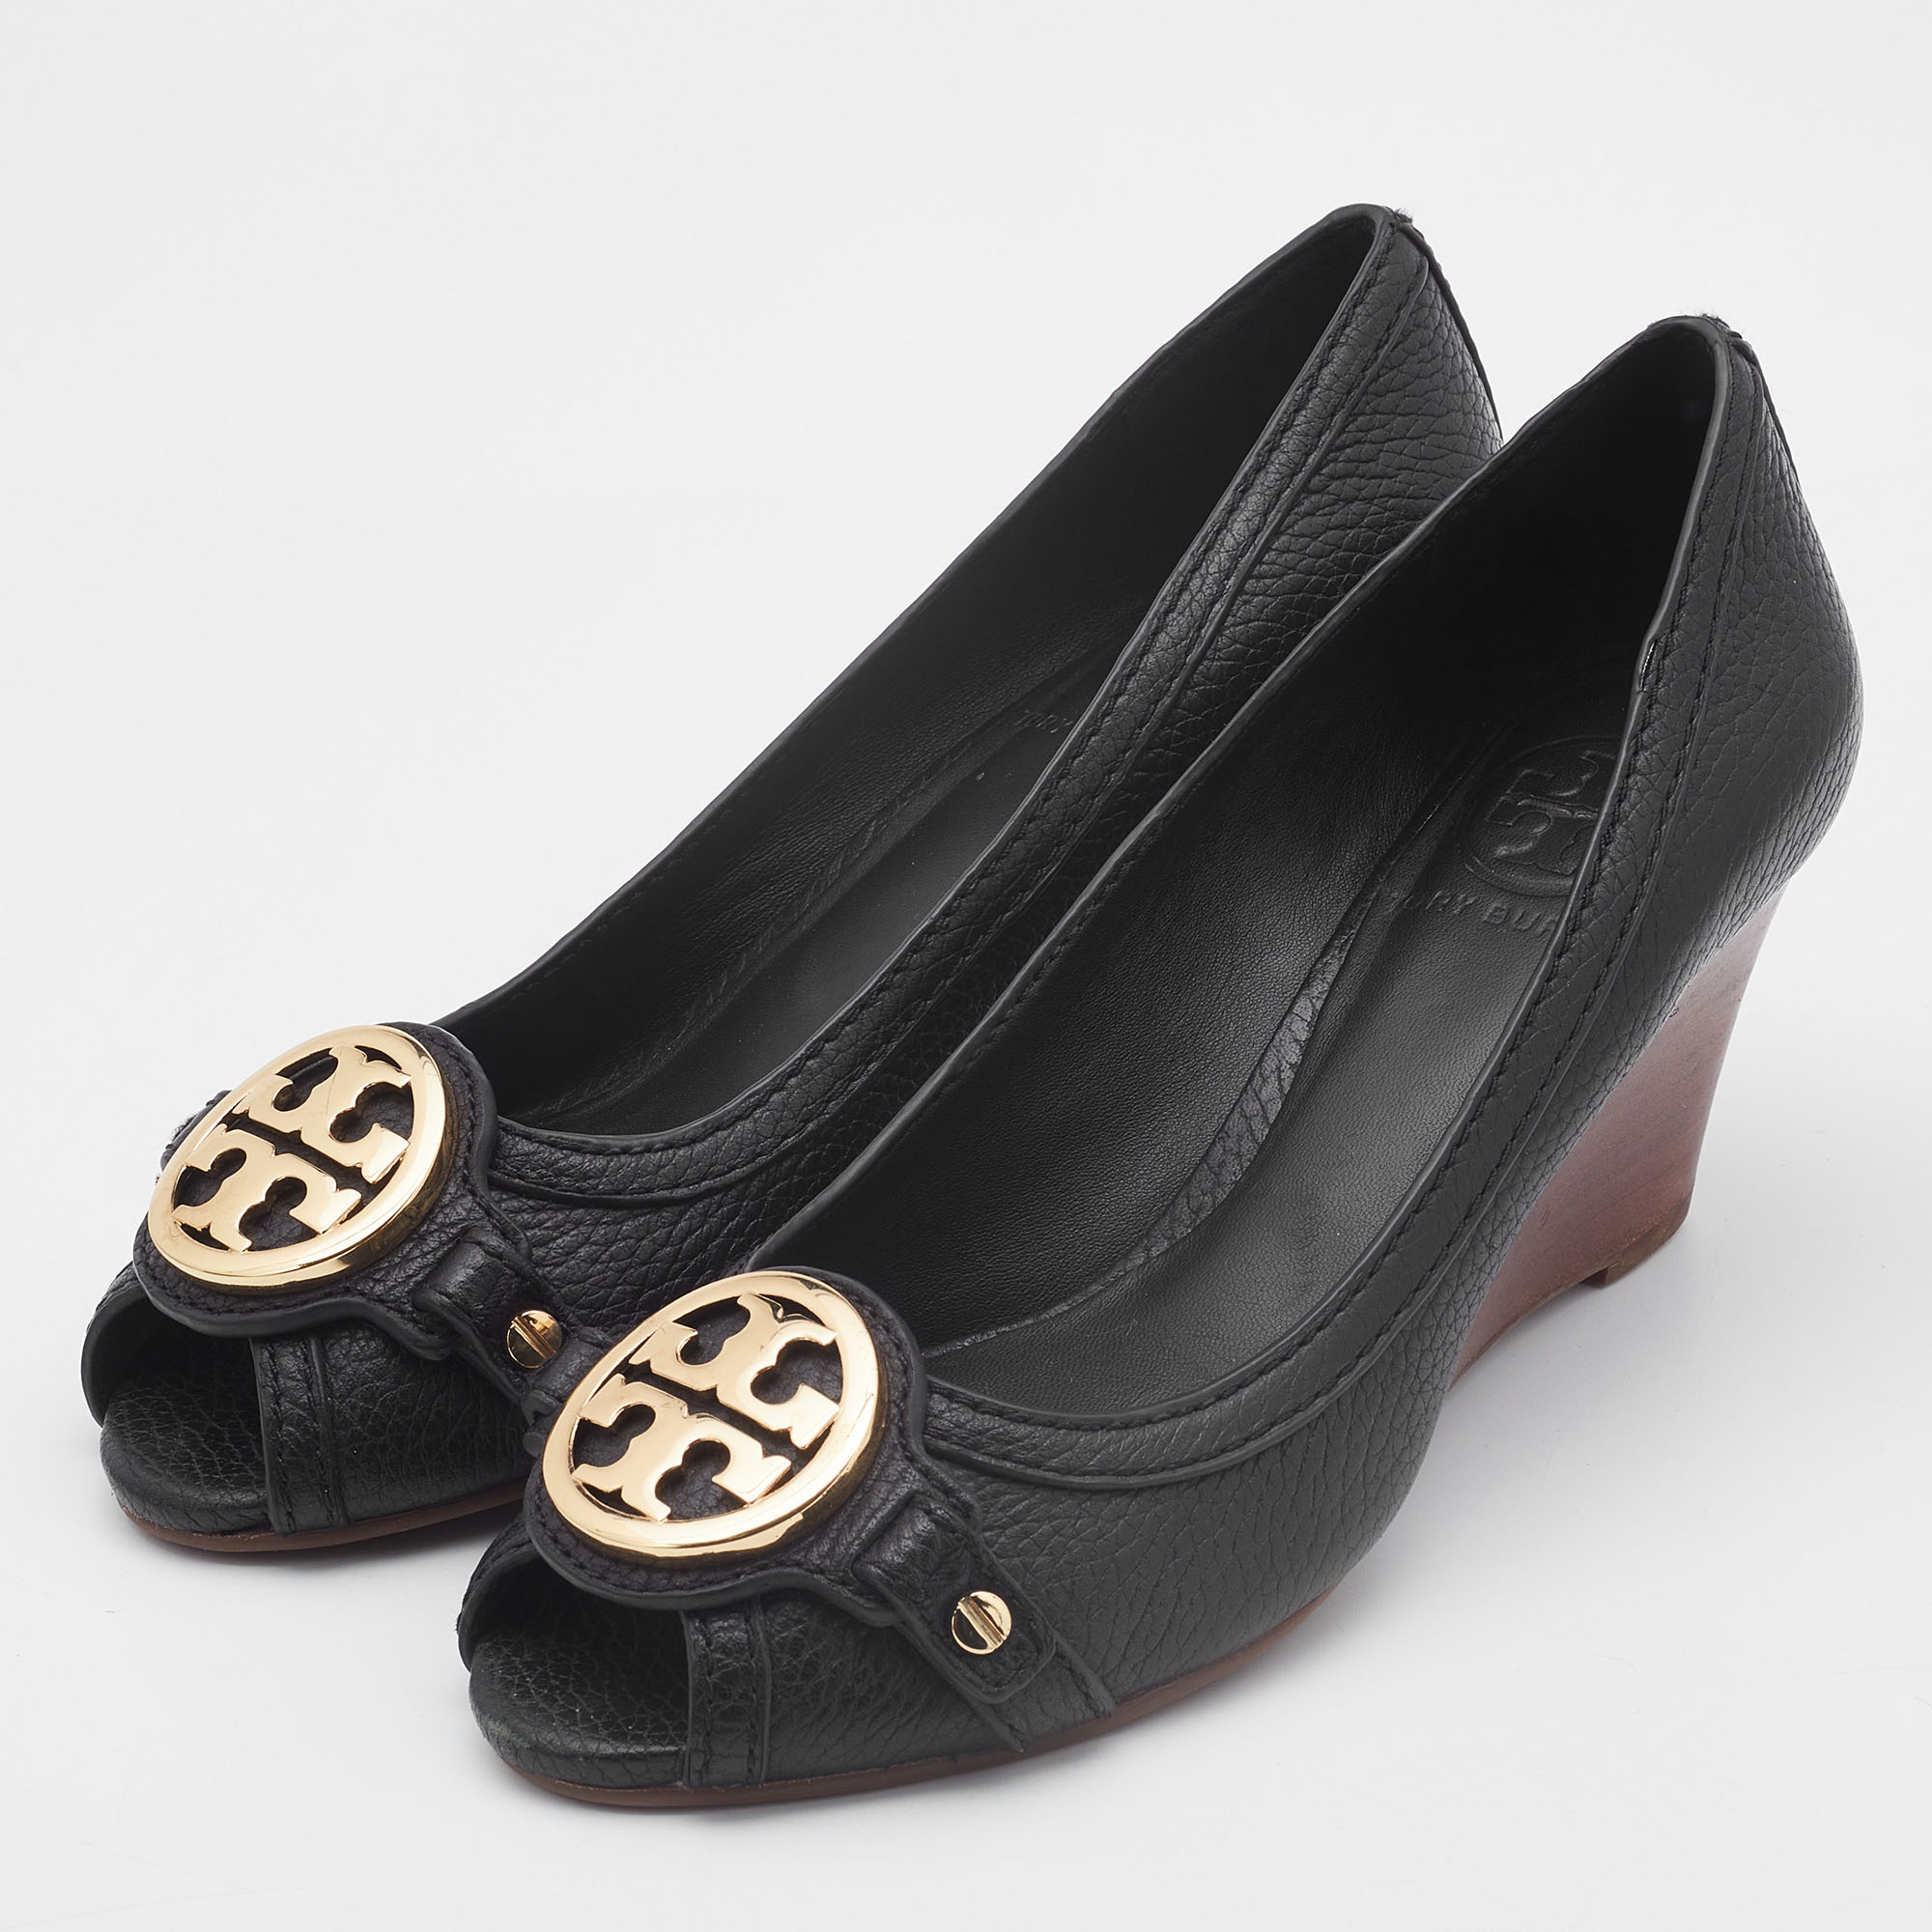 

Tory Burch Black Leather Sally 2 Wedge Pumps Size